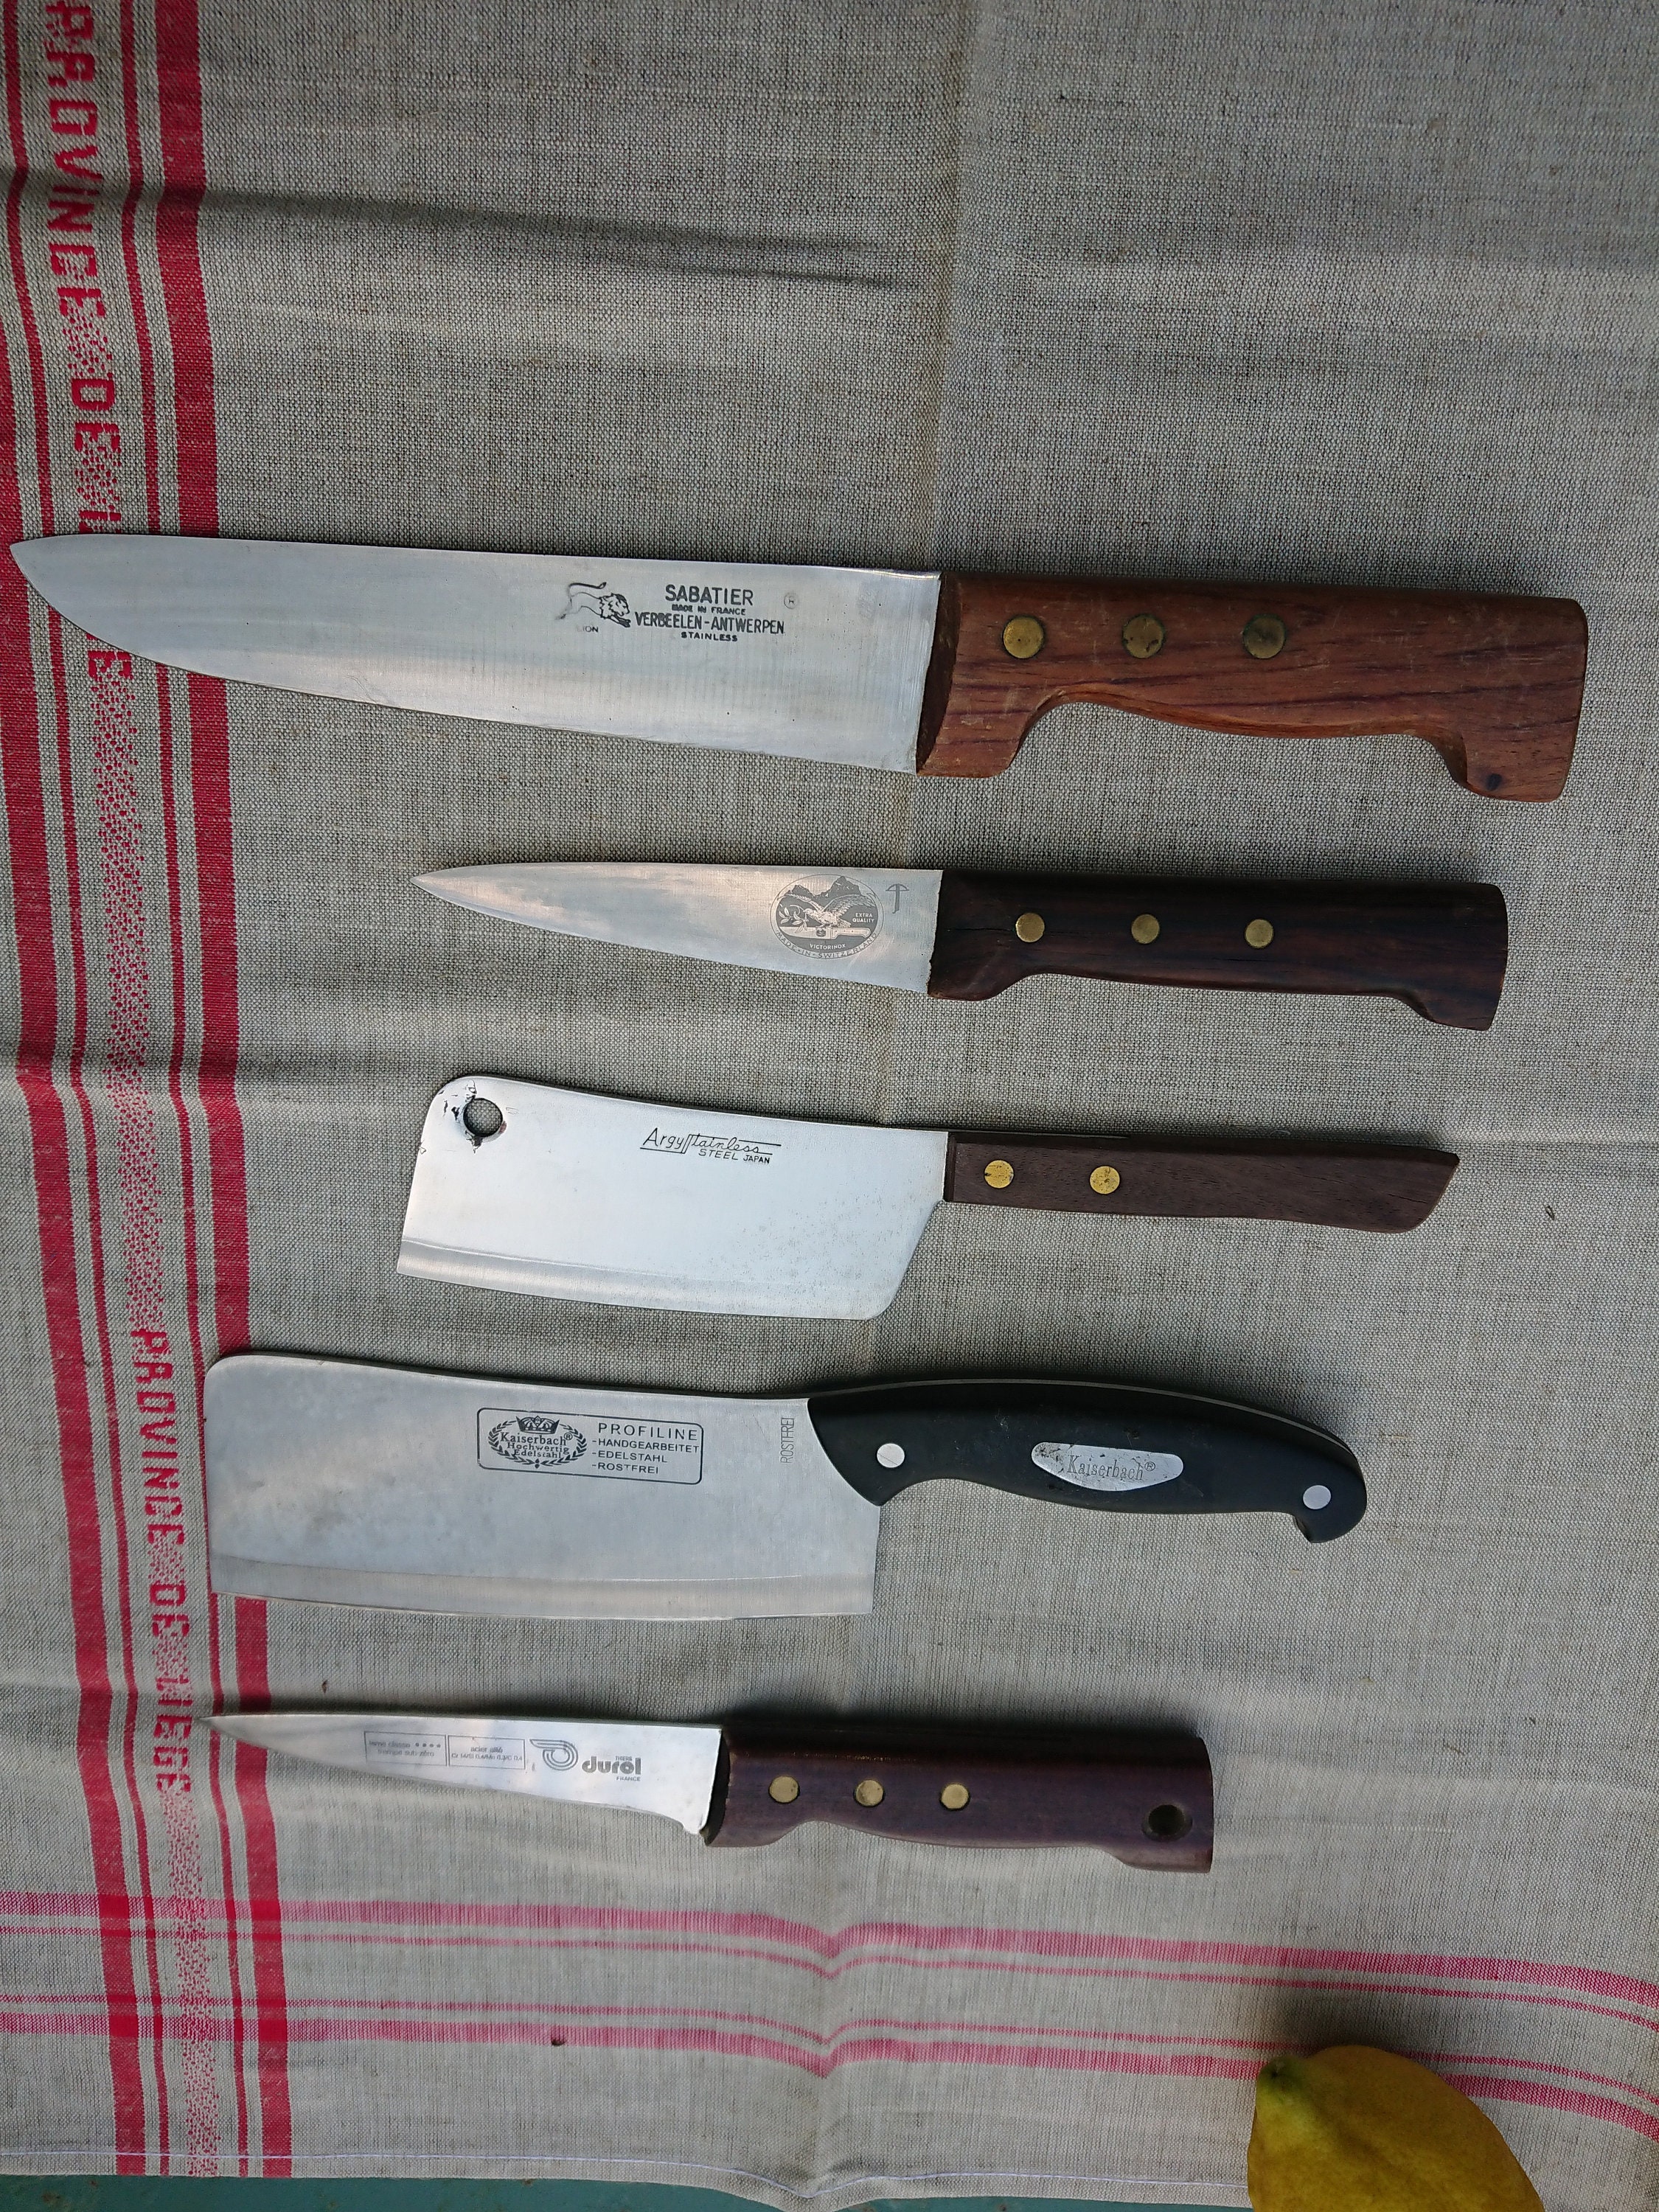 Sabatier Knives : kitchen and pocket knives for sale - Thiers Cutlery